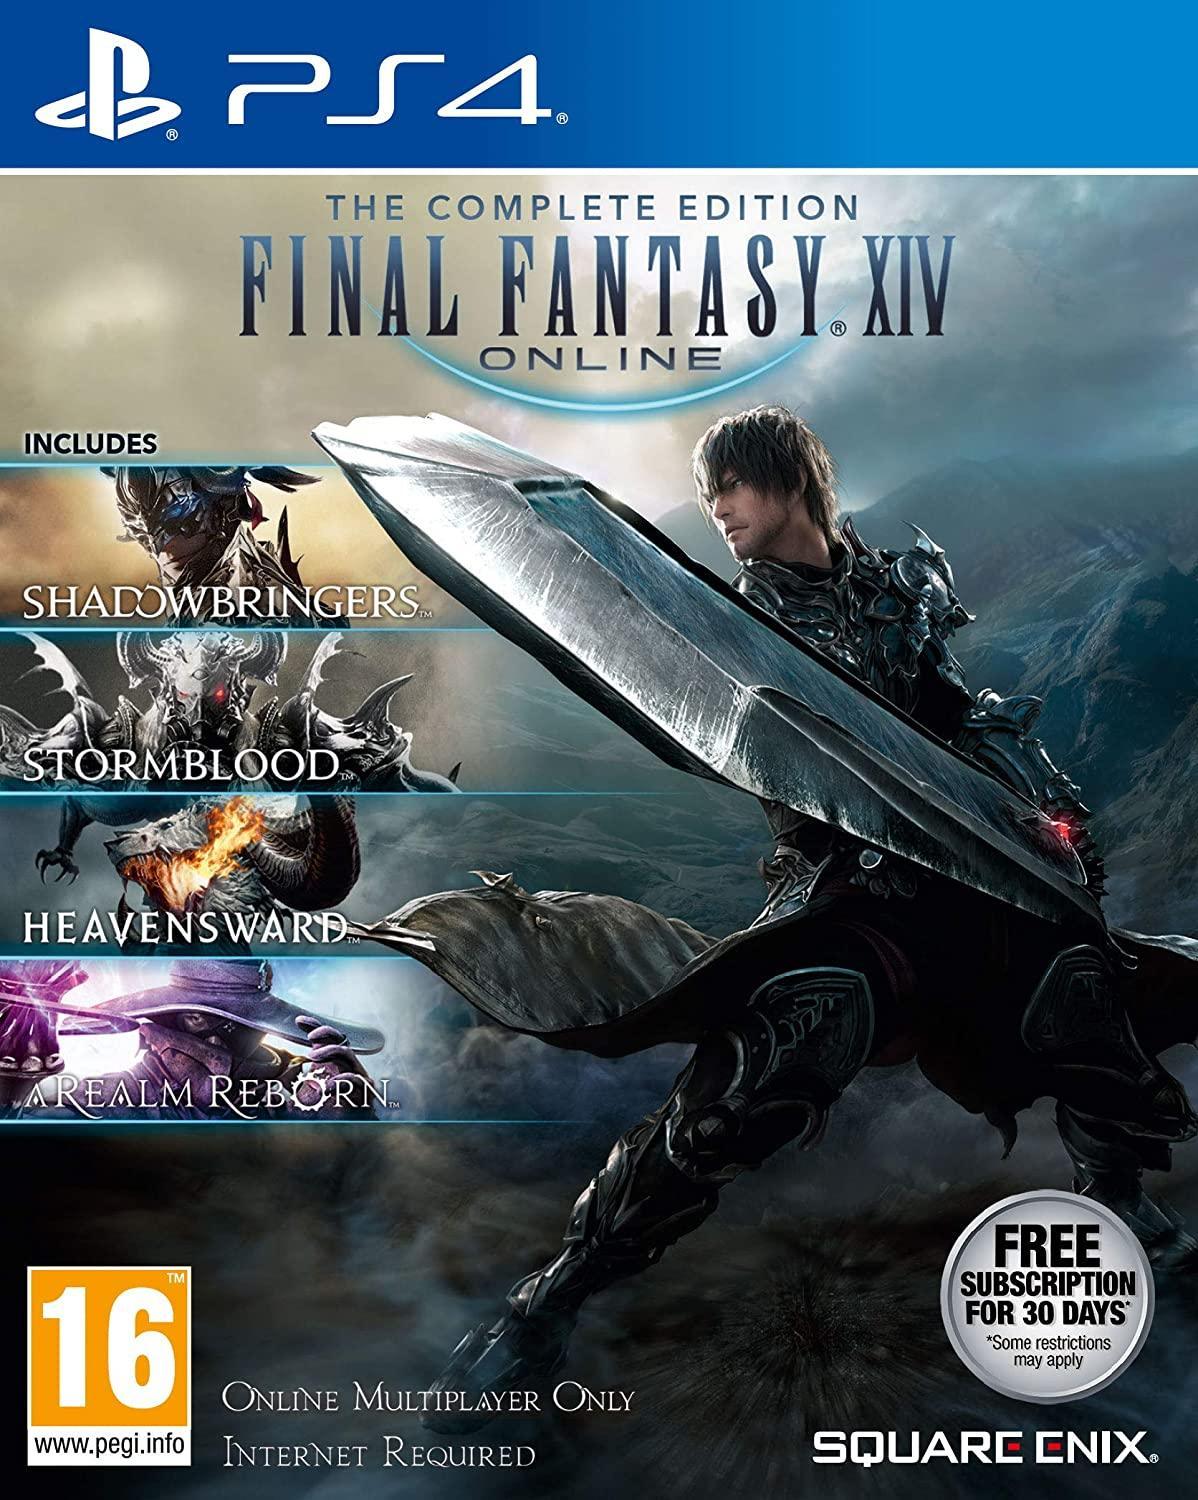 Final Fantasy XIV Online Complete Edition - Playstation 4 - GD Games 